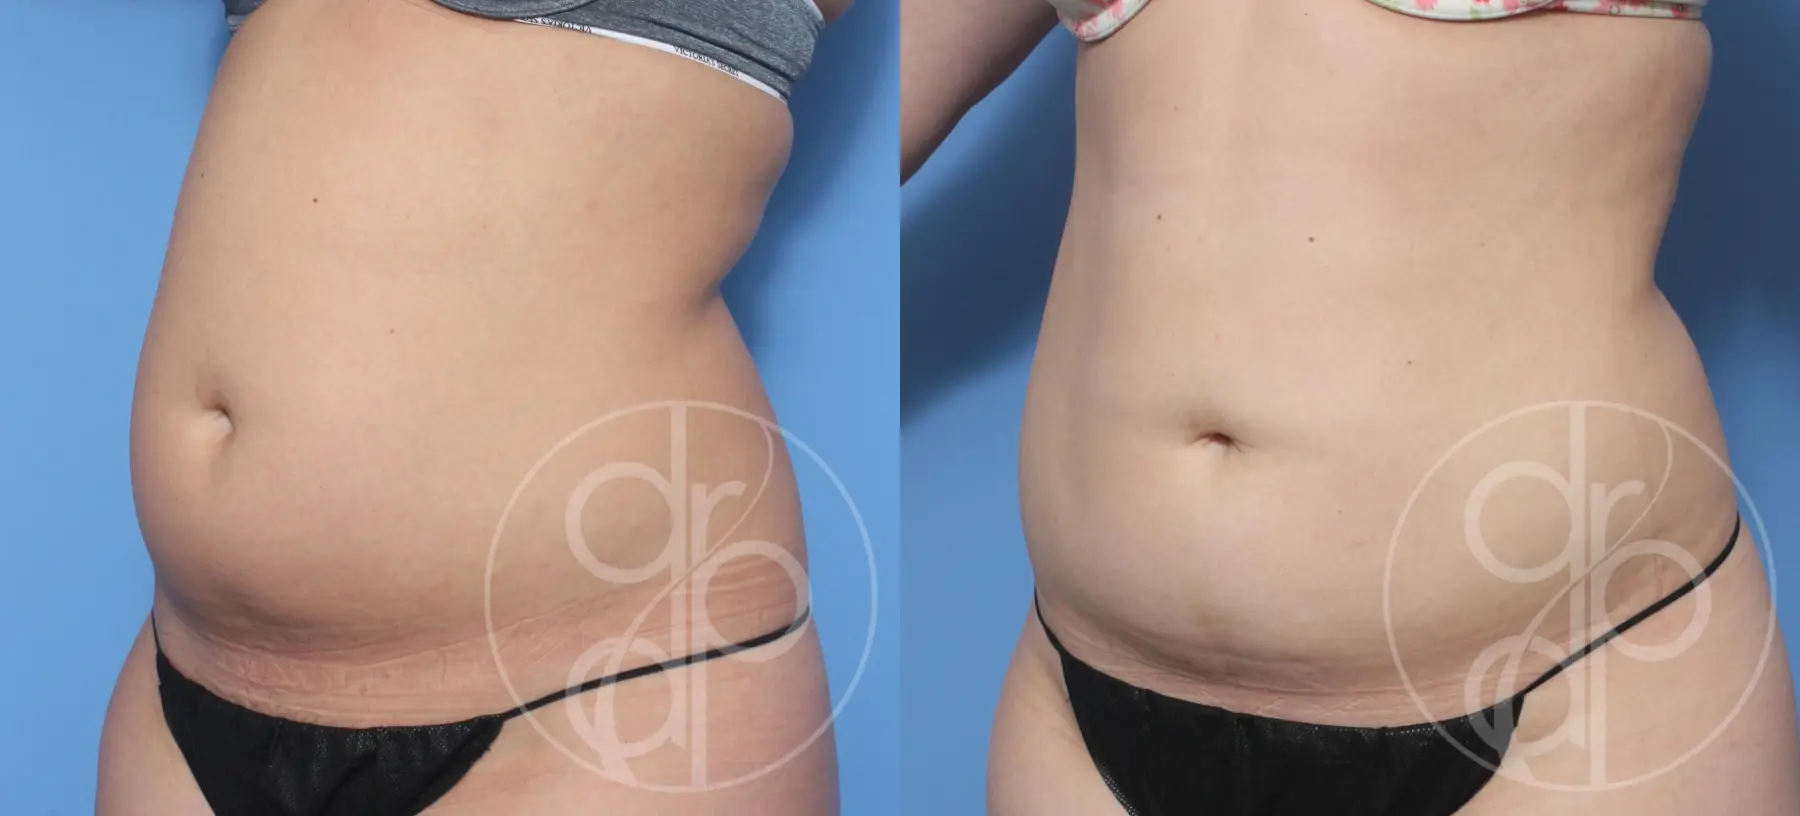 patient 12394 liposuction before and after result - Before and After 2